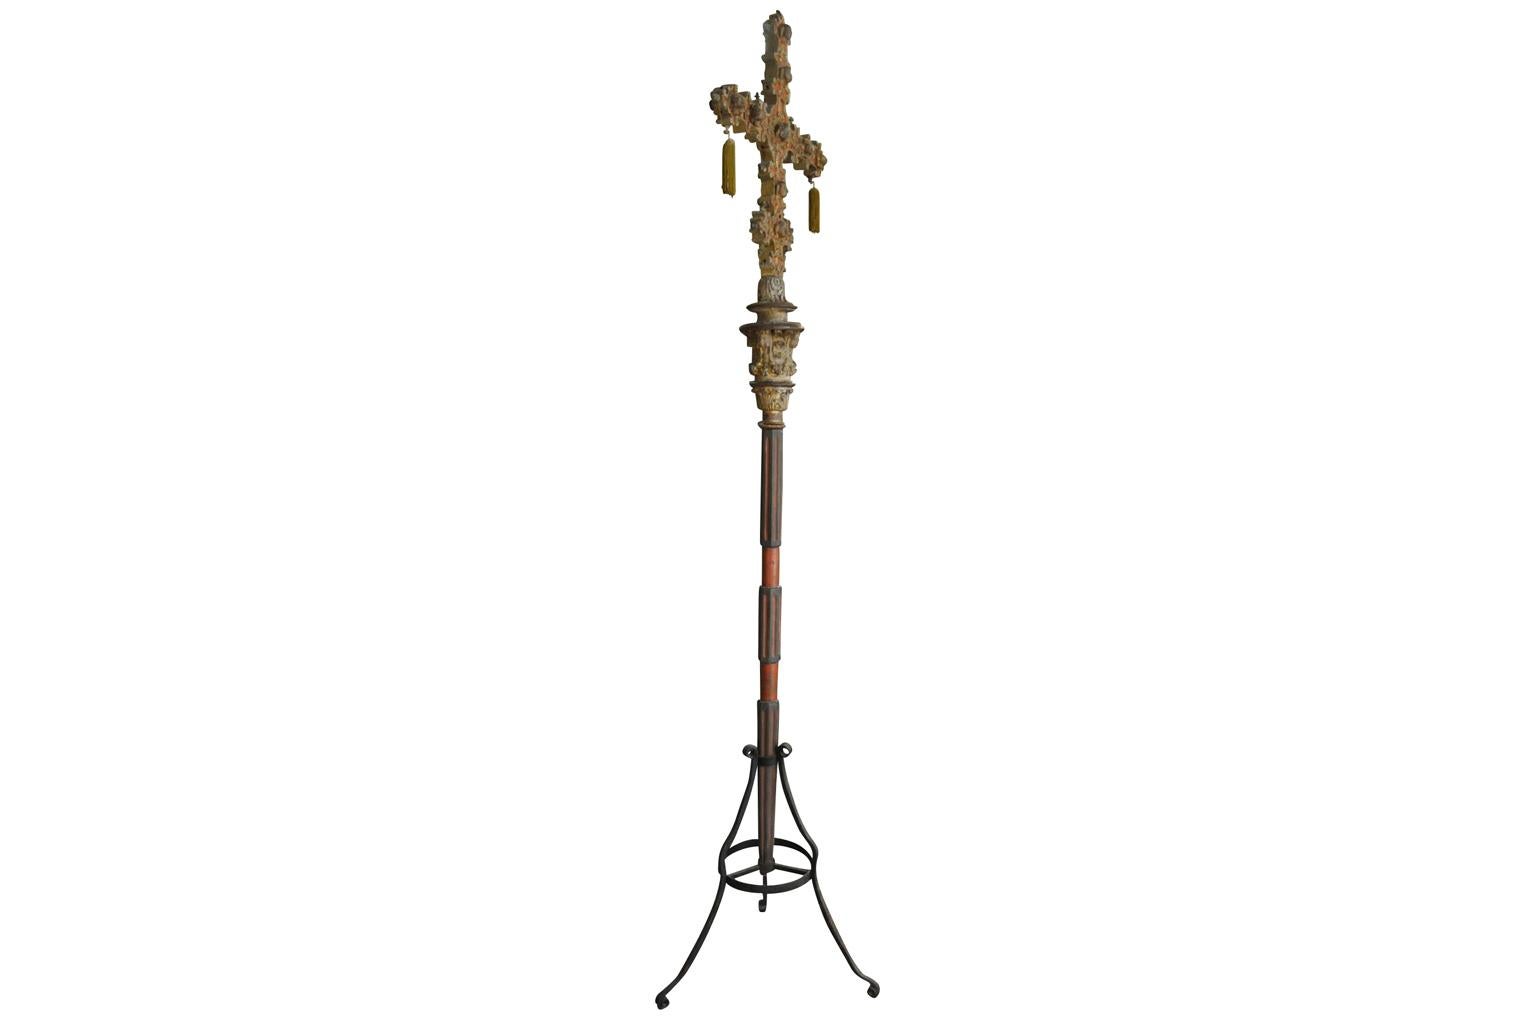 A stunning late 17th-early 18th century processional cross from Venice - housed in its iron stand. The magnificent piece is made from carved wood with beautiful polychrome and gilding. The cross is in 4 sections. An exceptional piece.